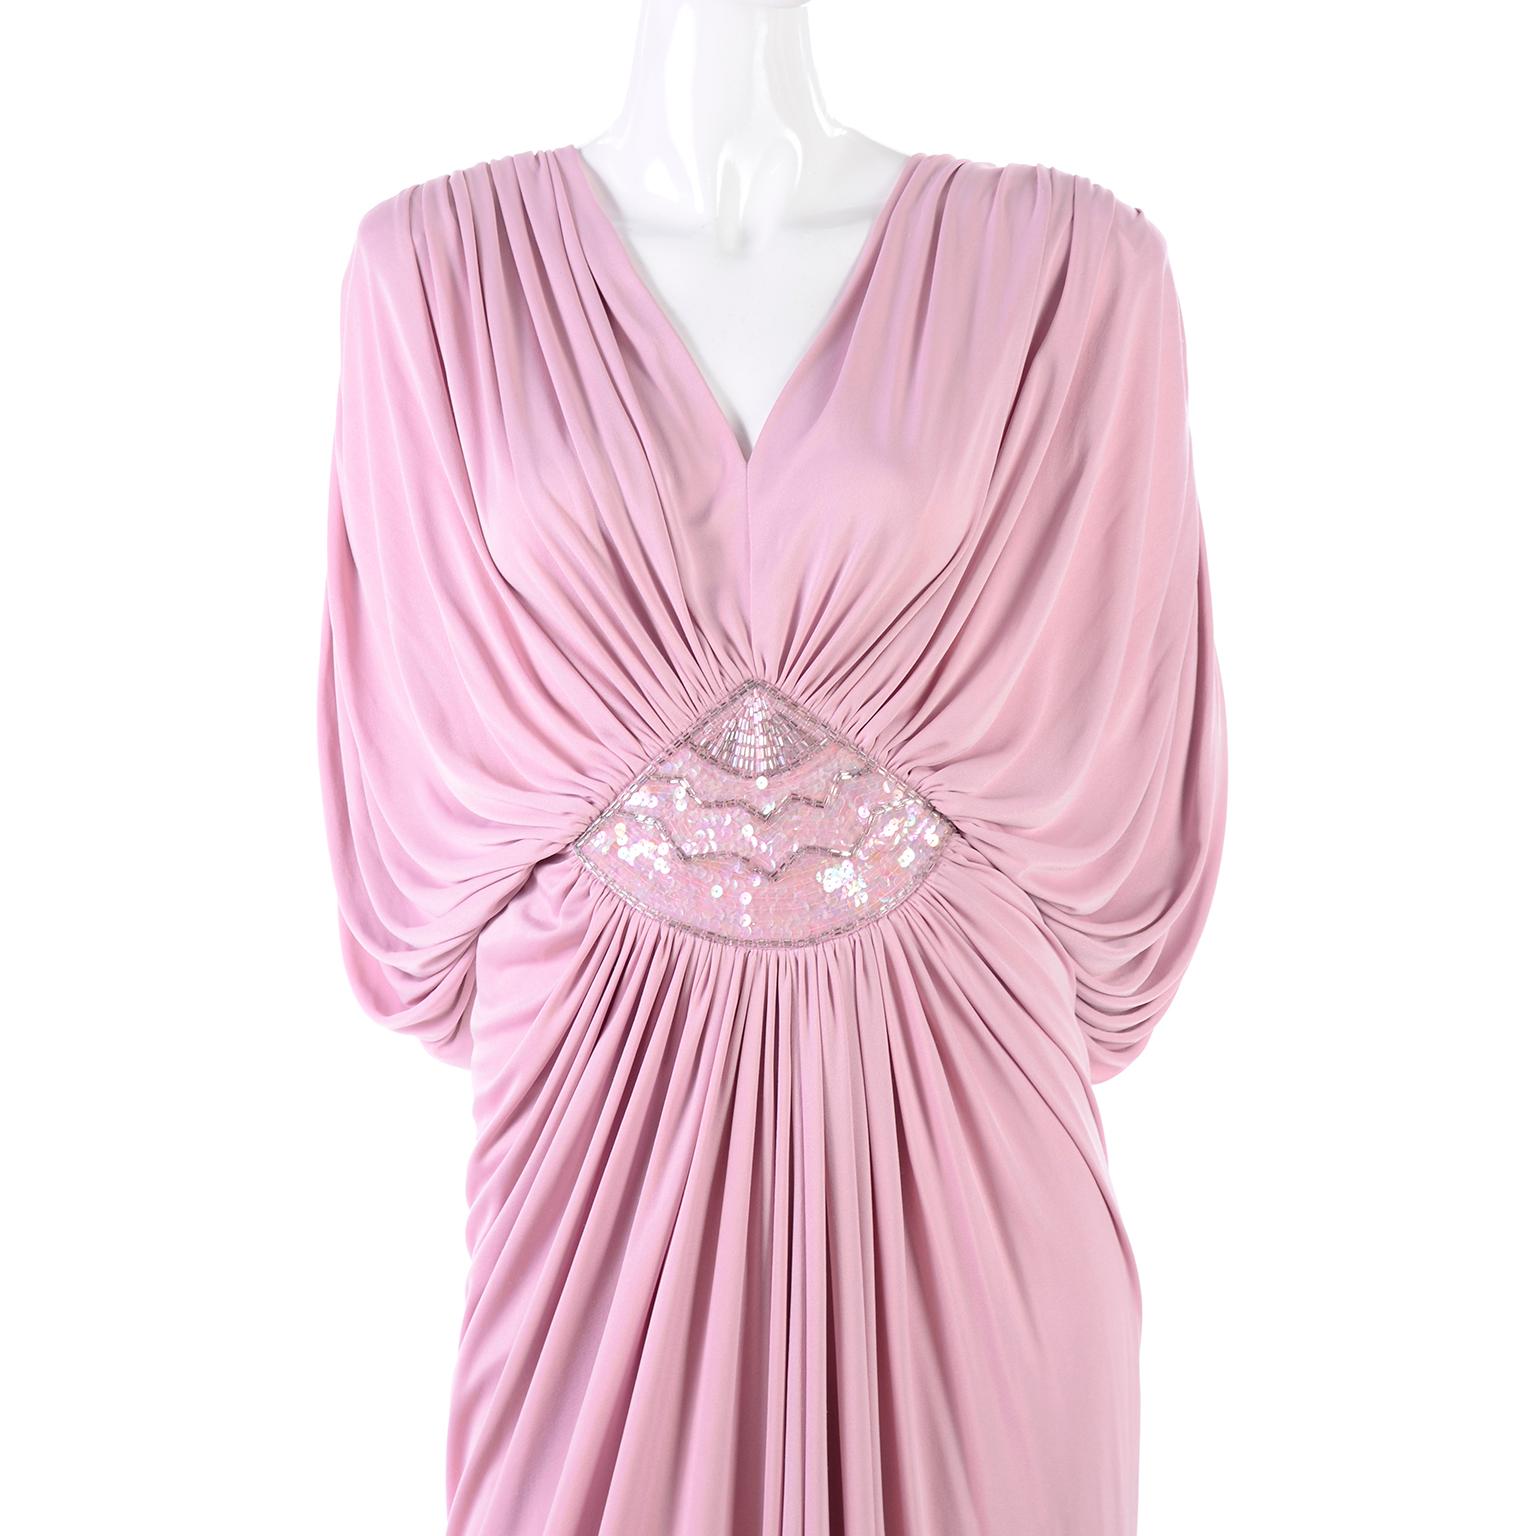 This is a show-stopping Tadashi Shoji evening gown from the early 1980's in a gorgeous draping rose pink/mauve jersey. It has a heavily draped bodice with batwing sleeves and a deep V neck. The drapes attach at the waist and cascade down the front